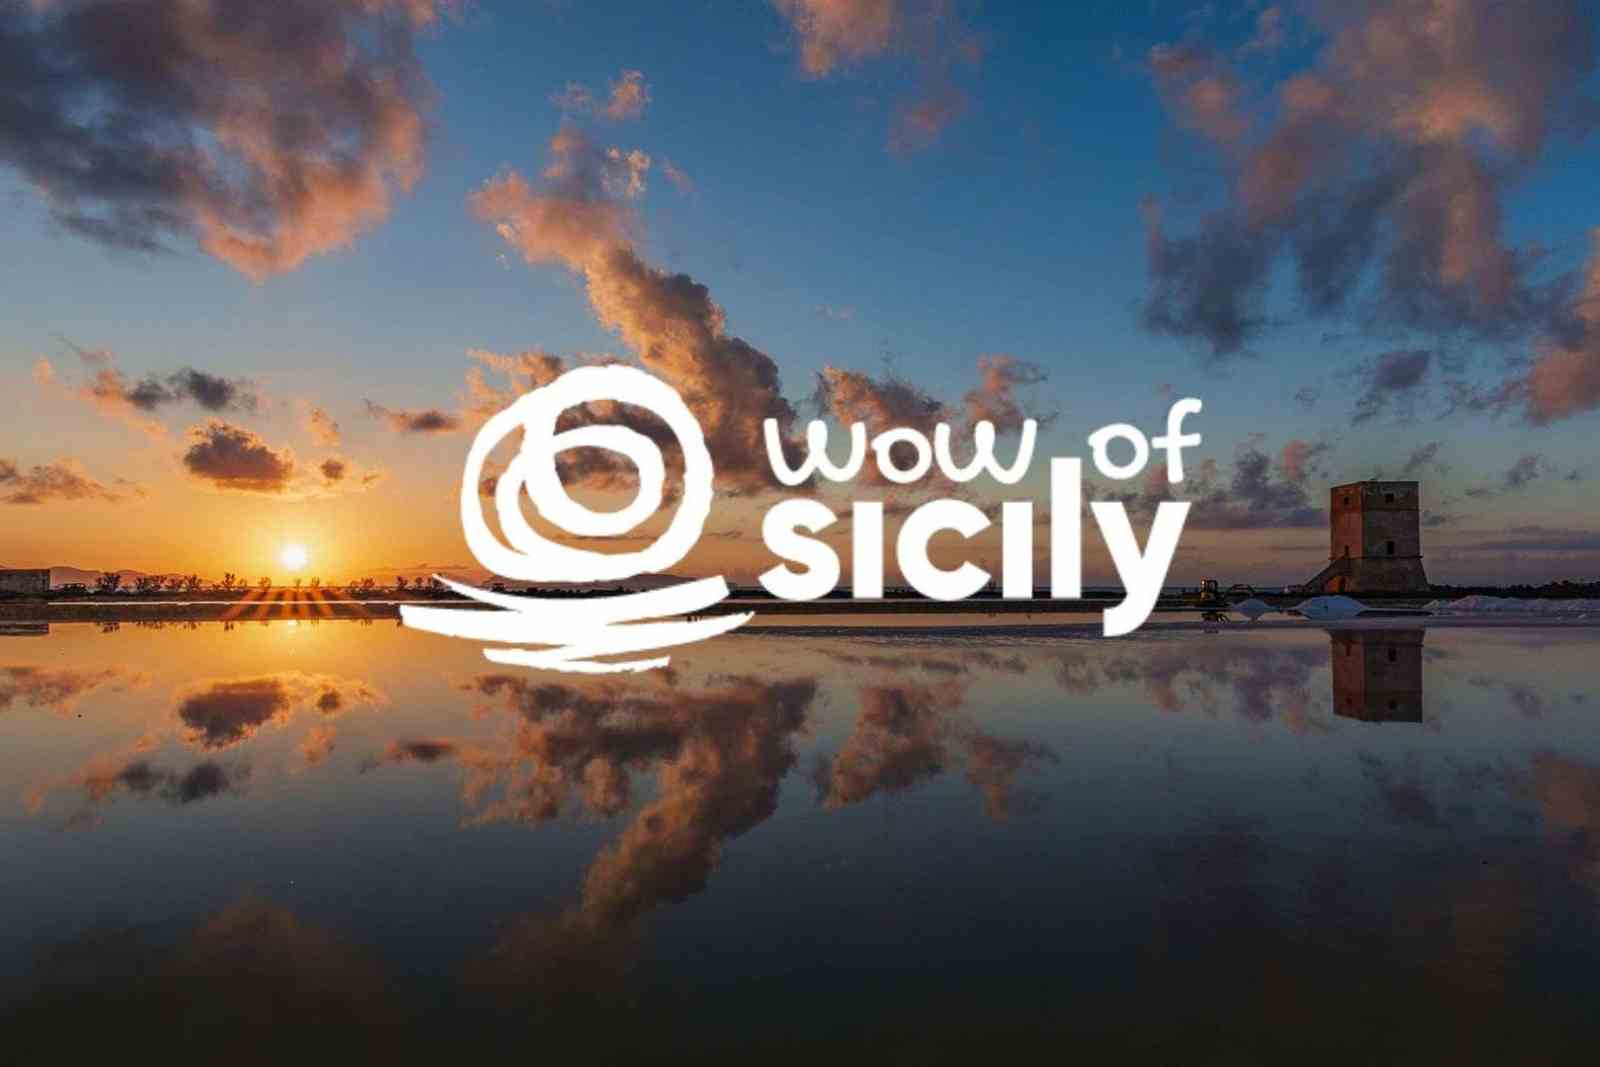 Contest WOW of Sicily: Here are the winners!